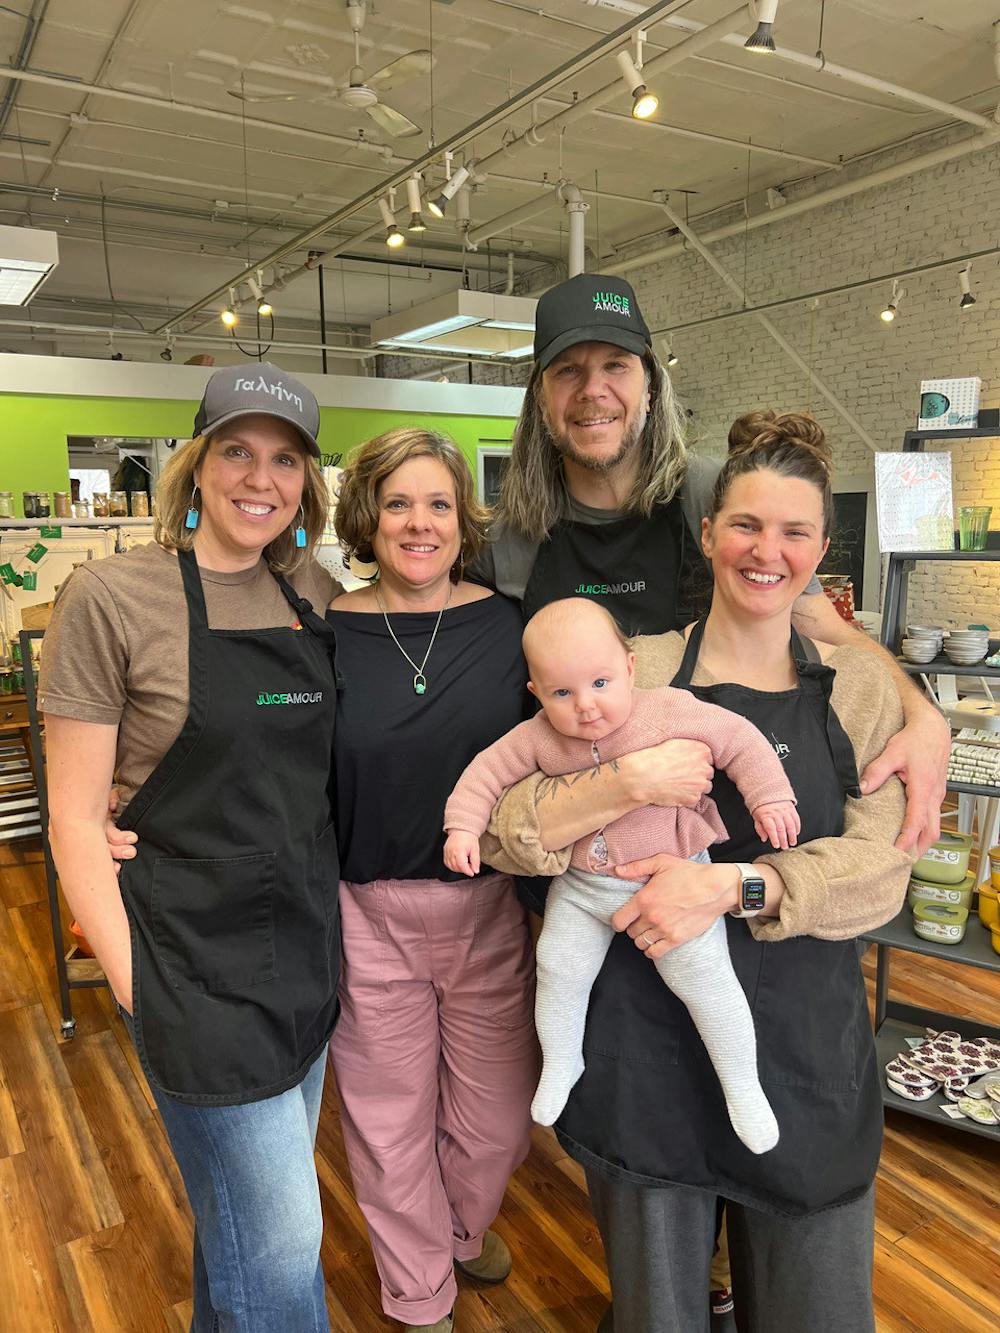 Juice Amour and Sustainable Kitchen are both family-owned businesses. Seen here, from left to right: Sheri Bedard, Shawna Sherwin (Sheri’s sister and manager), Rick.